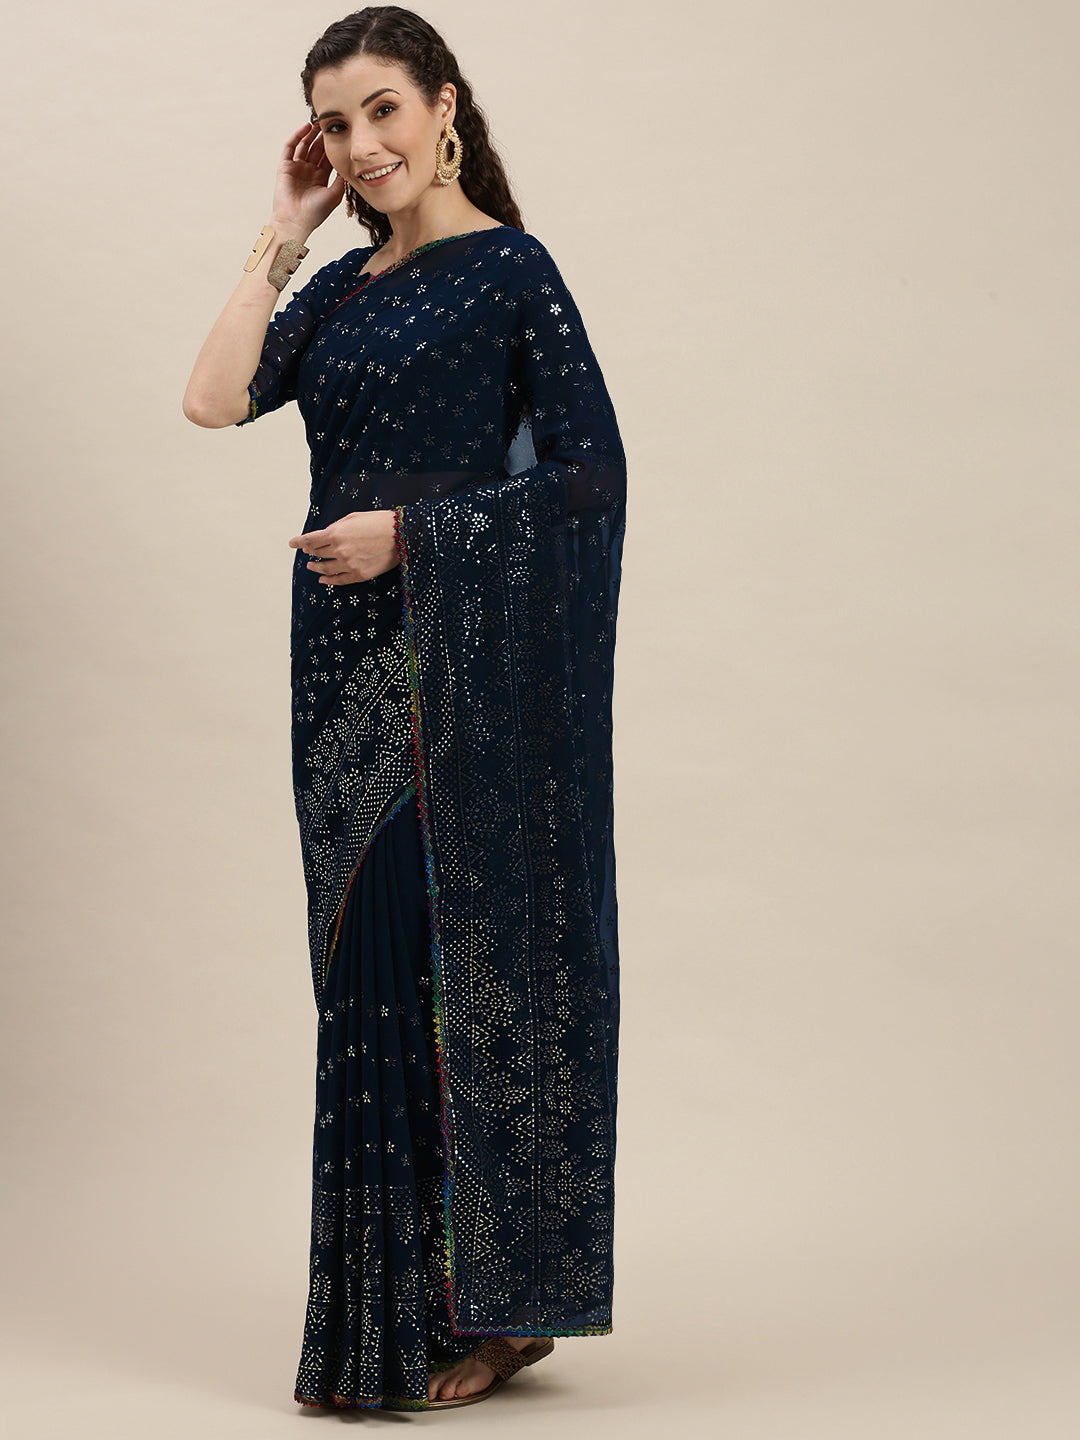 Awesome Blue Color Silver-Toned Beads Embroidered Saree